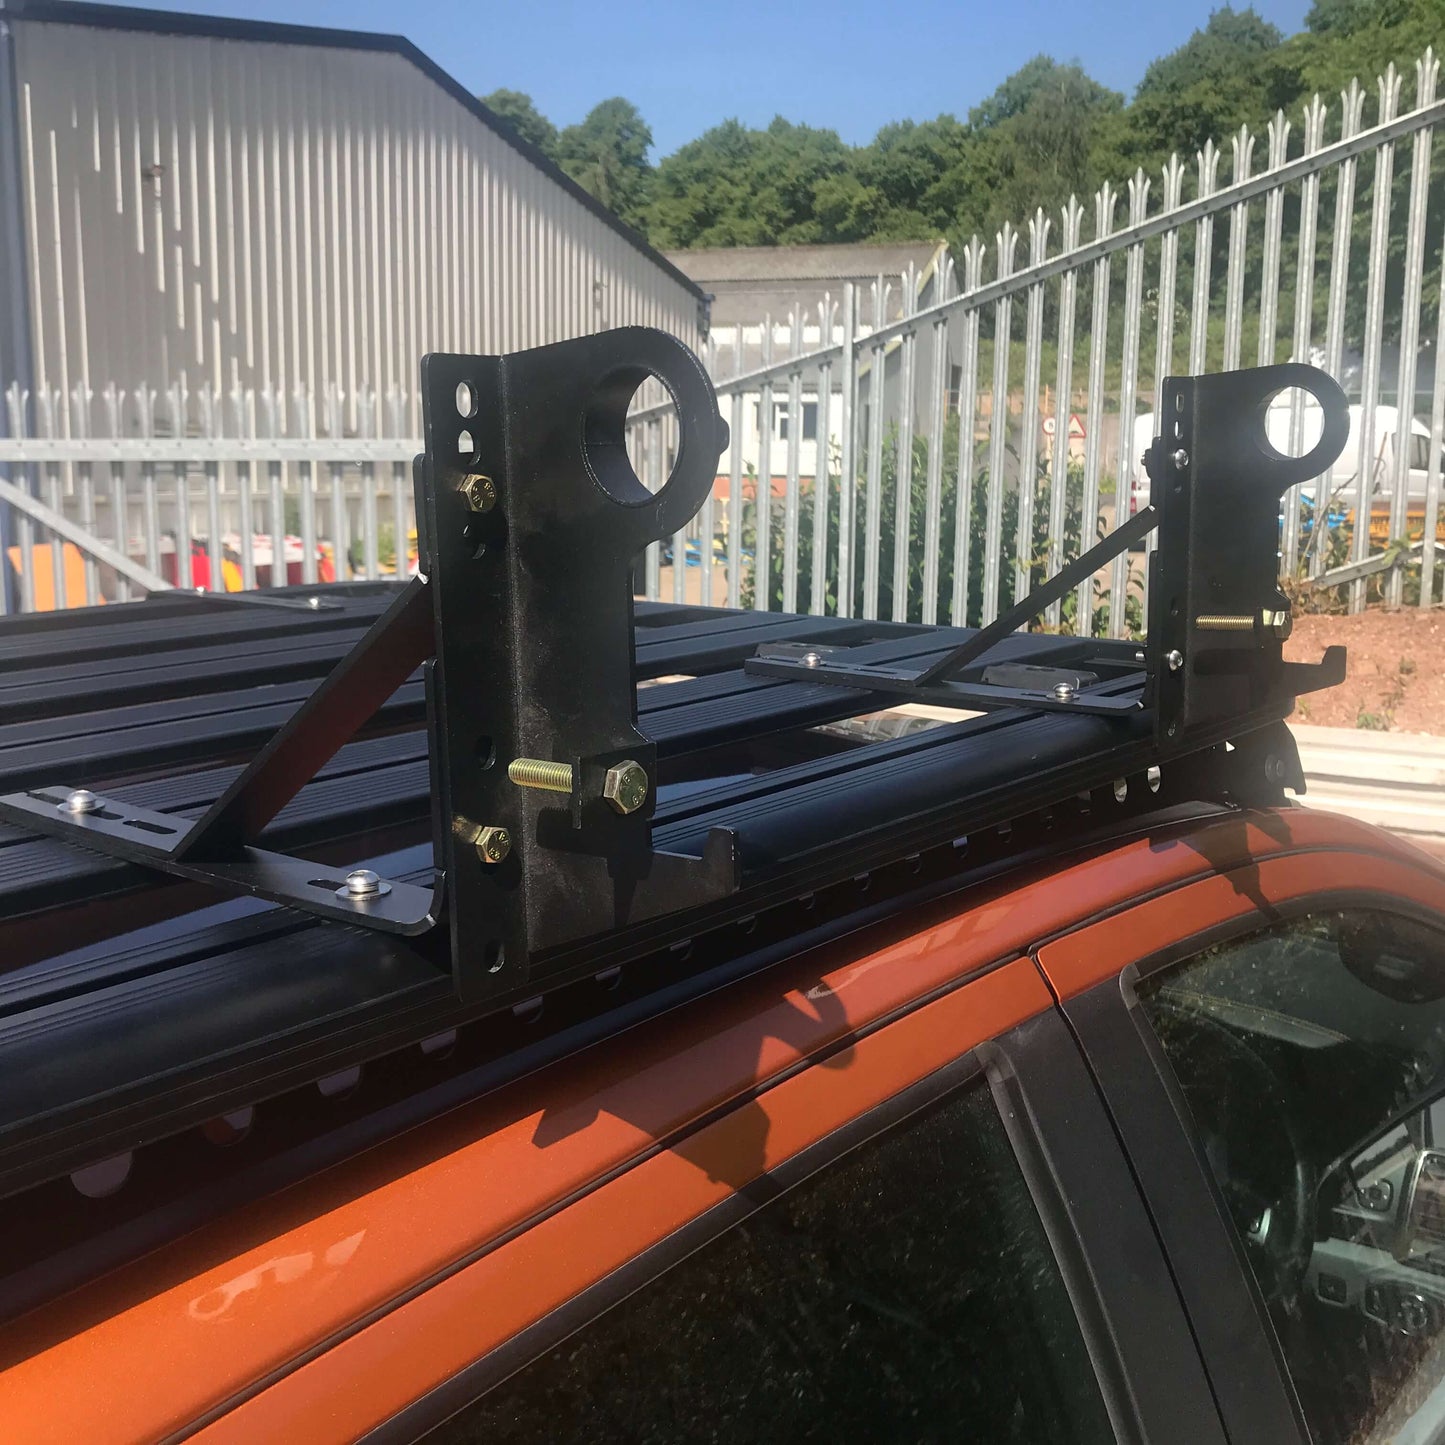 Shovel and Jack Holder Add-on for Direct4x4 AluMod Low Profile Roof Racks -  - sold by Direct4x4